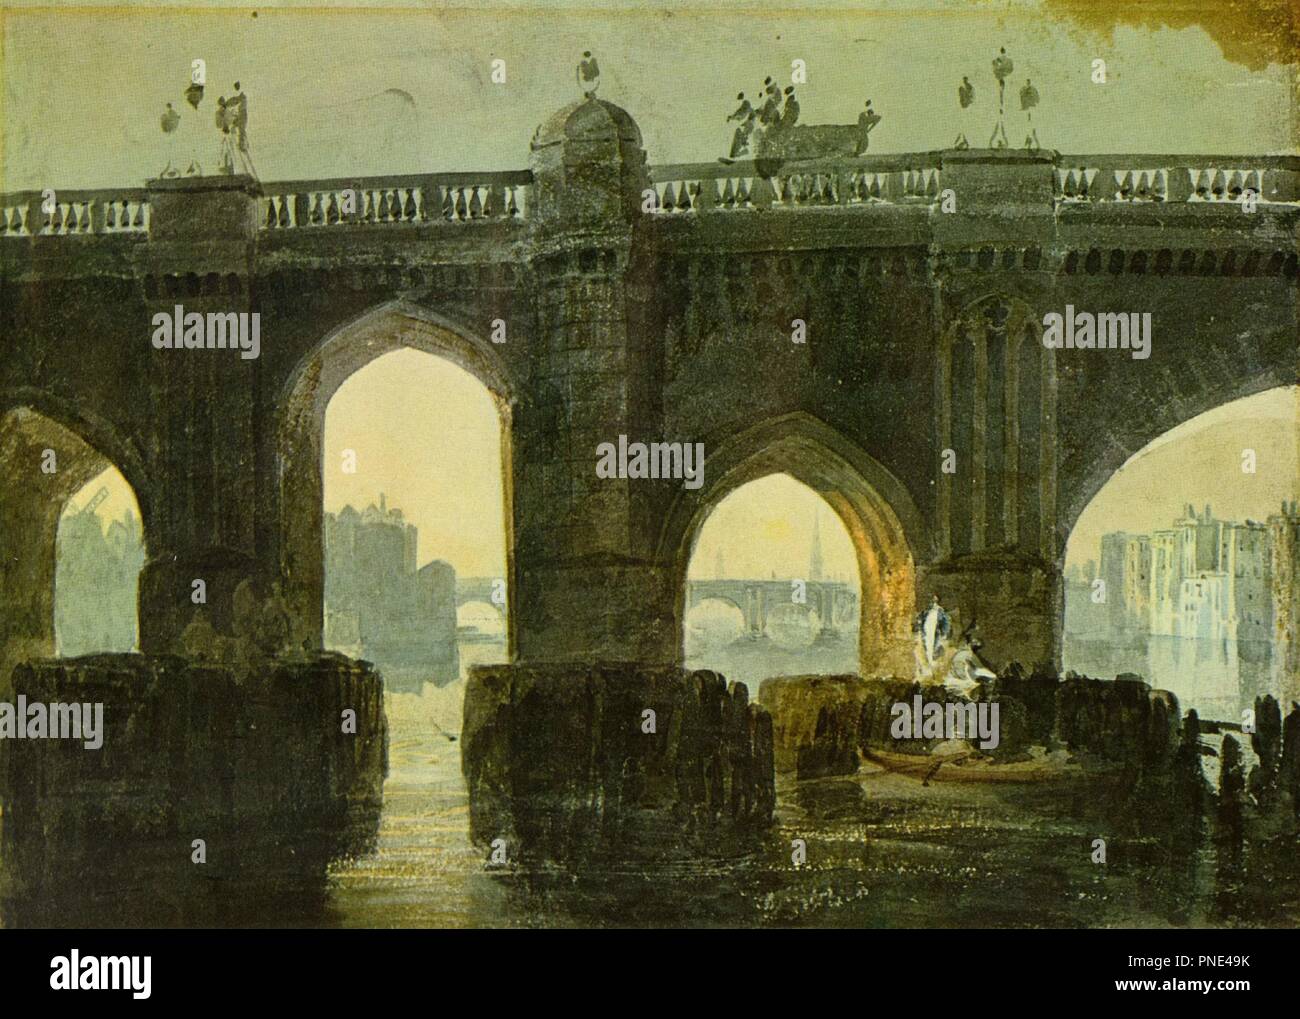 Old London Bridge. Date/Period: 1796-1897. Watercolor. Height: 26 cm (10.2 in); Width: 35.5 cm (13.9 in). Author: J. M. W. Turner. TURNER, JOSEPH MALLORD WILLIAM. Stock Photo